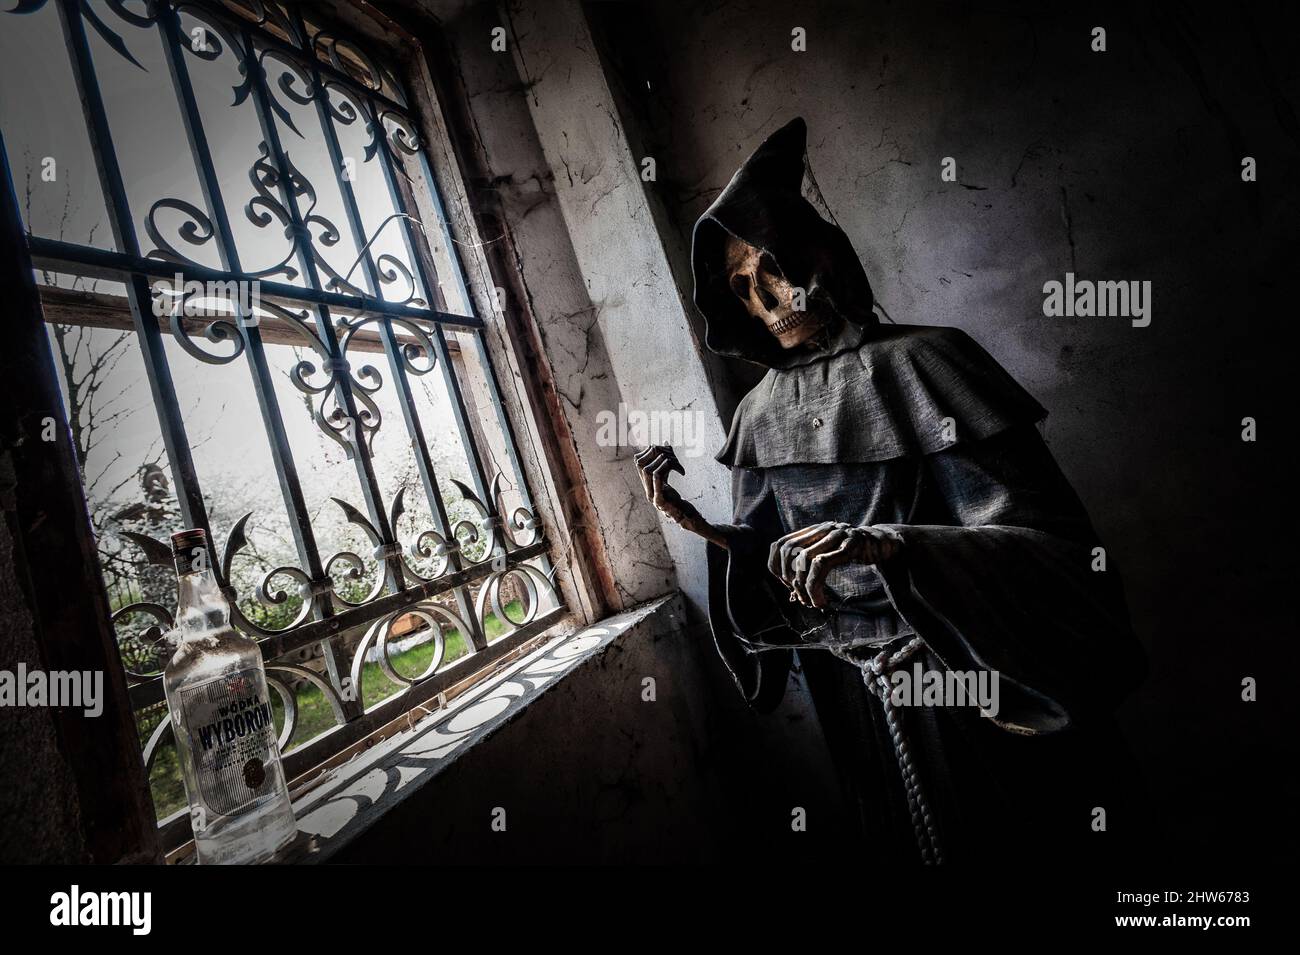 November 2021, Urbex Italy, disturbing statue depicting death, in an abandoned house Stock Photo